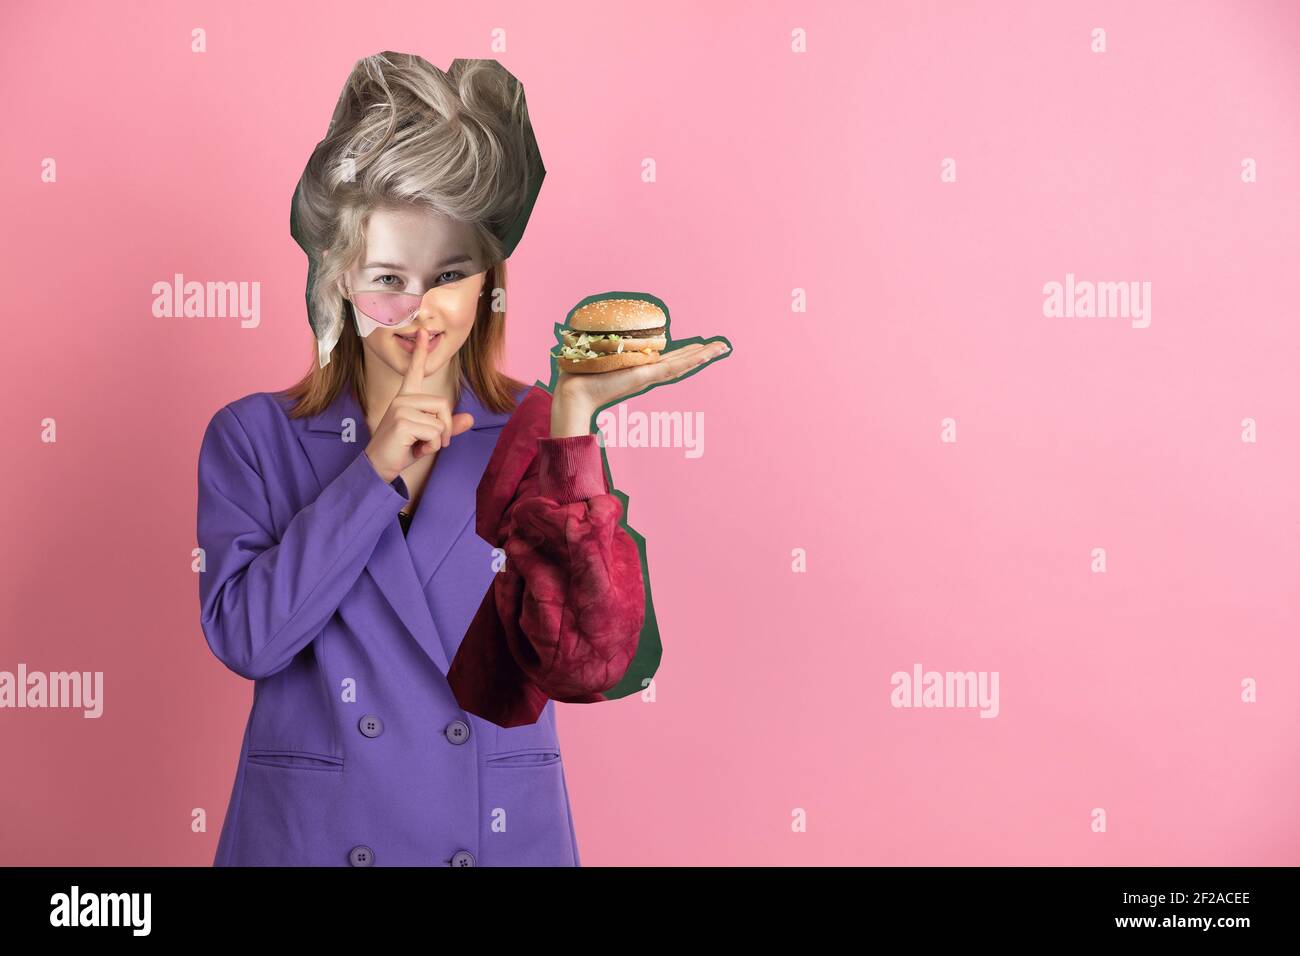 Mysterious woman with burger. Magazine style collage with model outfit mixed of different eras. Copyspace for ad. Trendy colors, modern and vintage, renaissansse fashion. Cintemporary art collage. Stock Photo